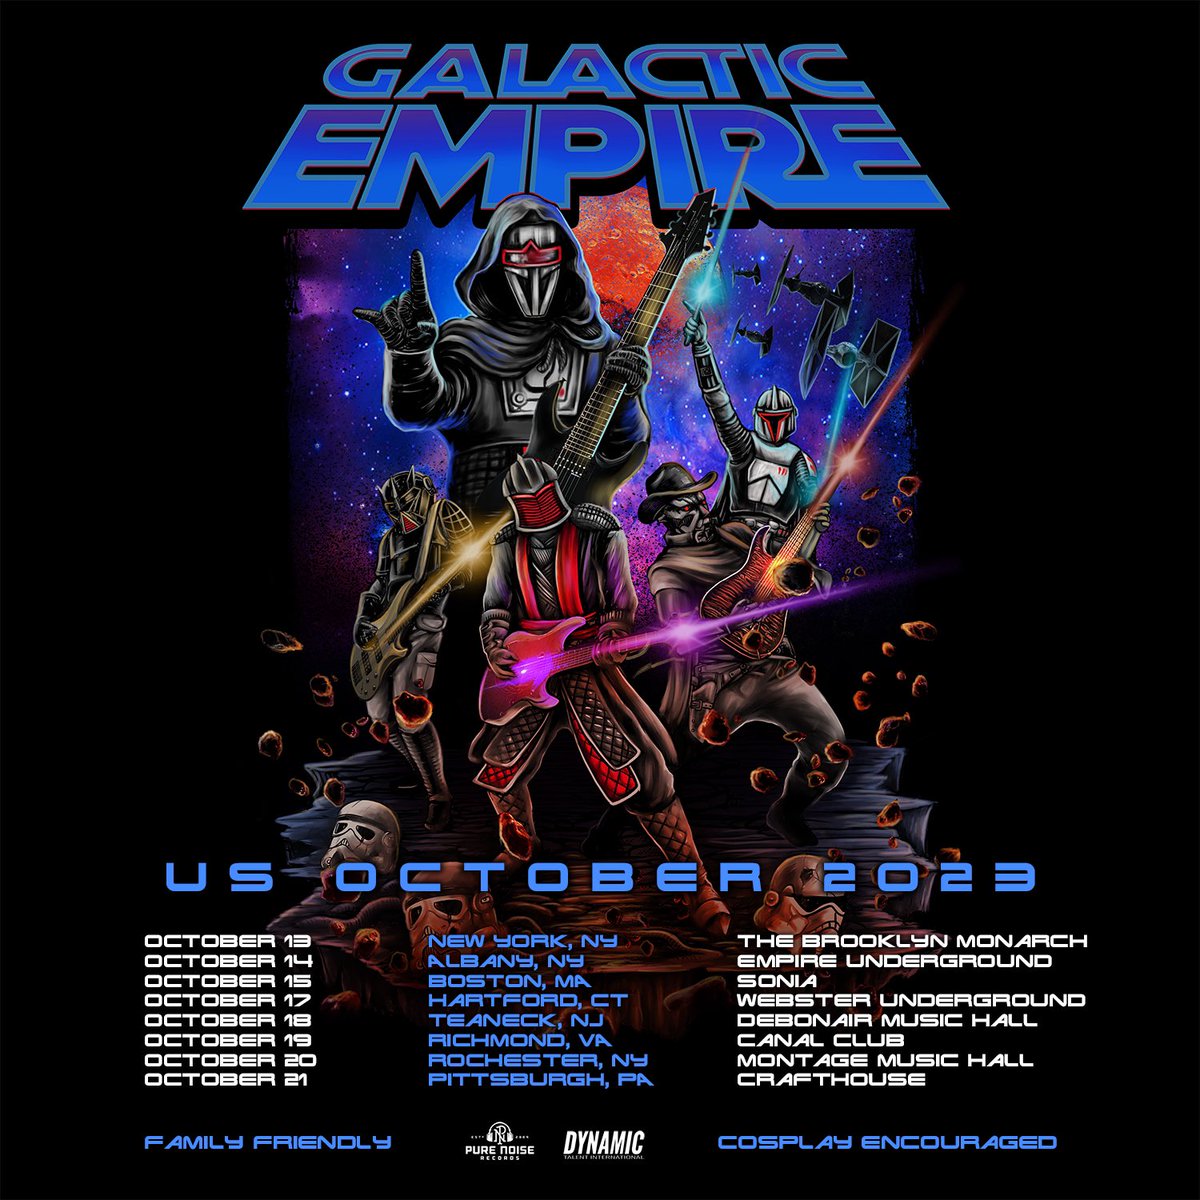 NORTH EAST UNITED STATES - Tour begins in two weeks! Witness the Empire LIVE as we sonically annihilate your local systems. #galacticempire #tour #starwars #metal #band #metalband #cosplay